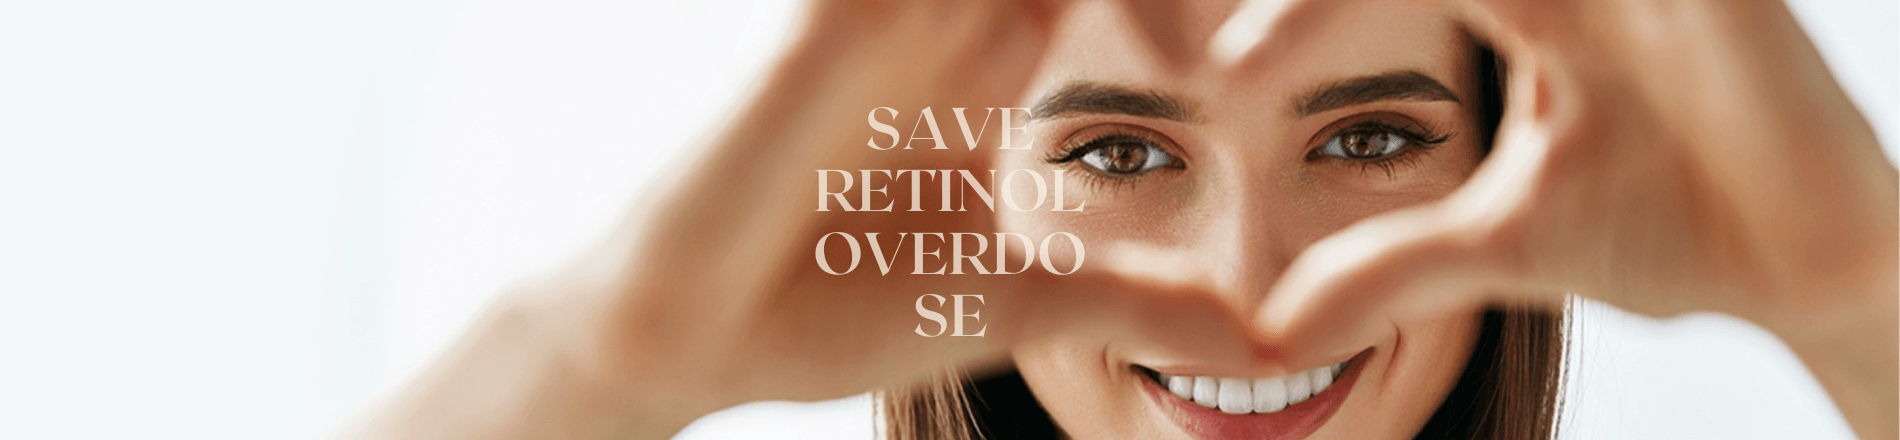 Retinol: Save Your Skin After an Overdose - 1st Mini Skincare Fridges With LED Mirror | COOSEON®